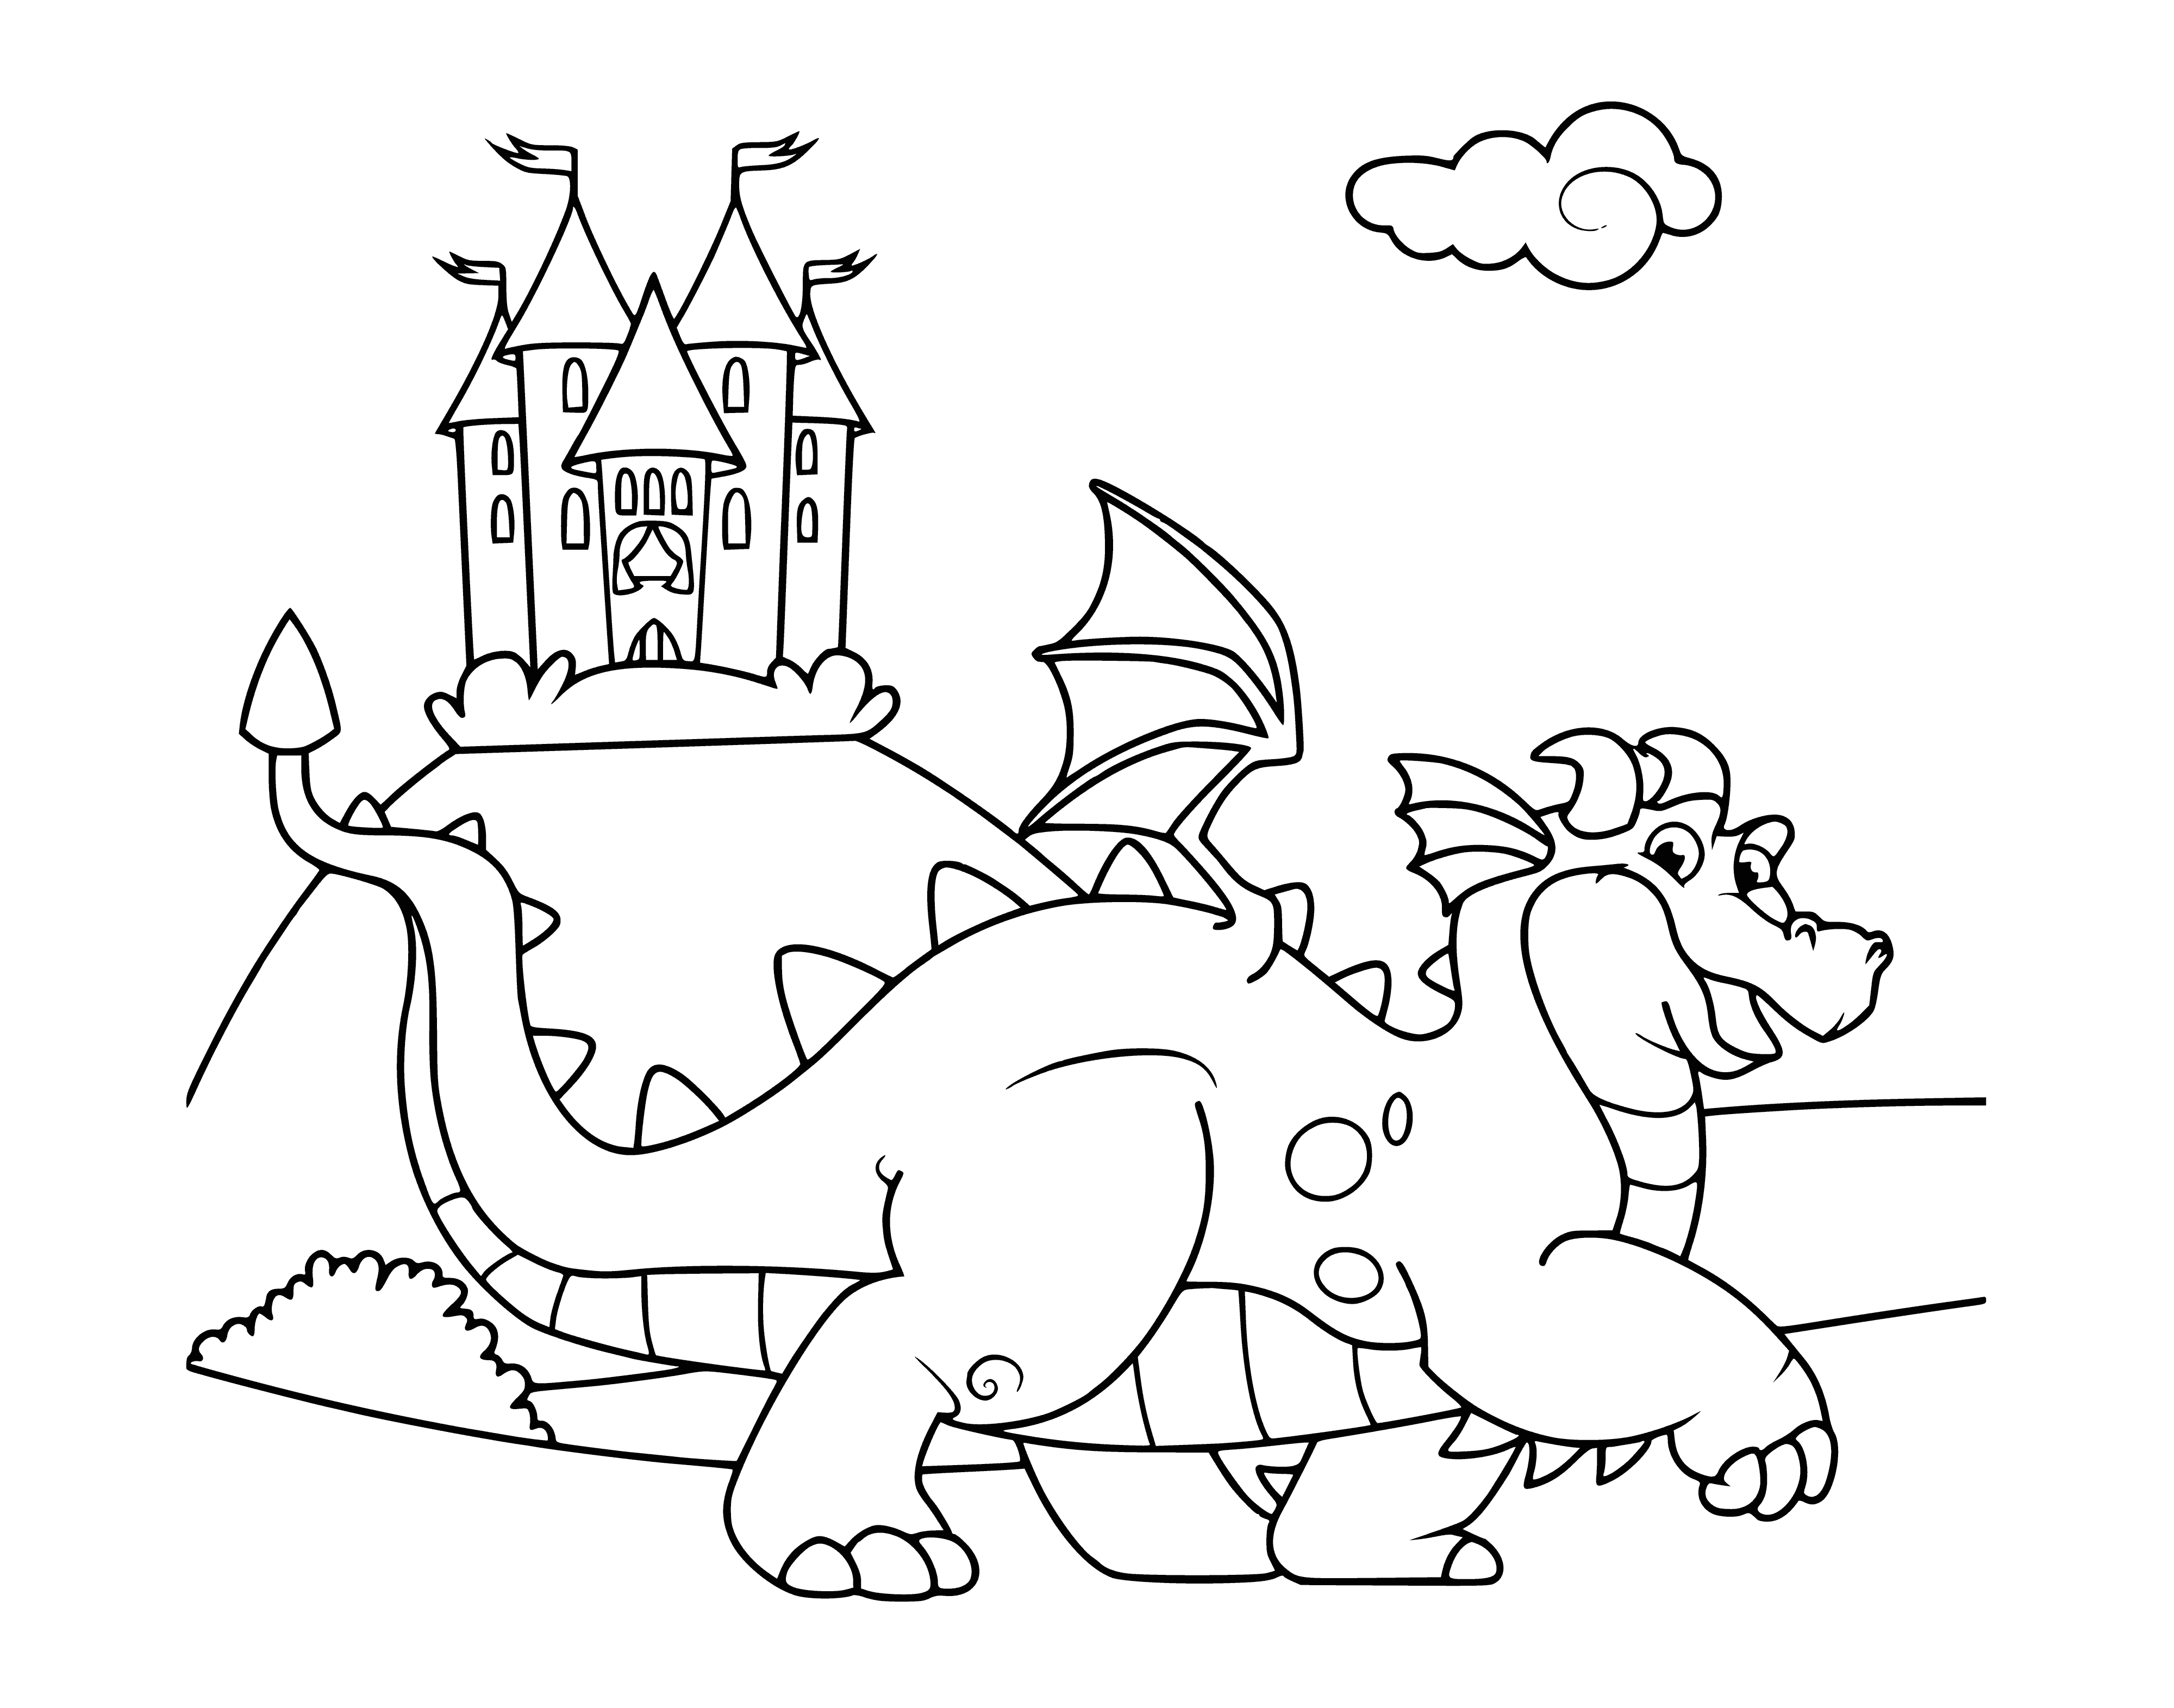 The dragon guards the castle coloring page